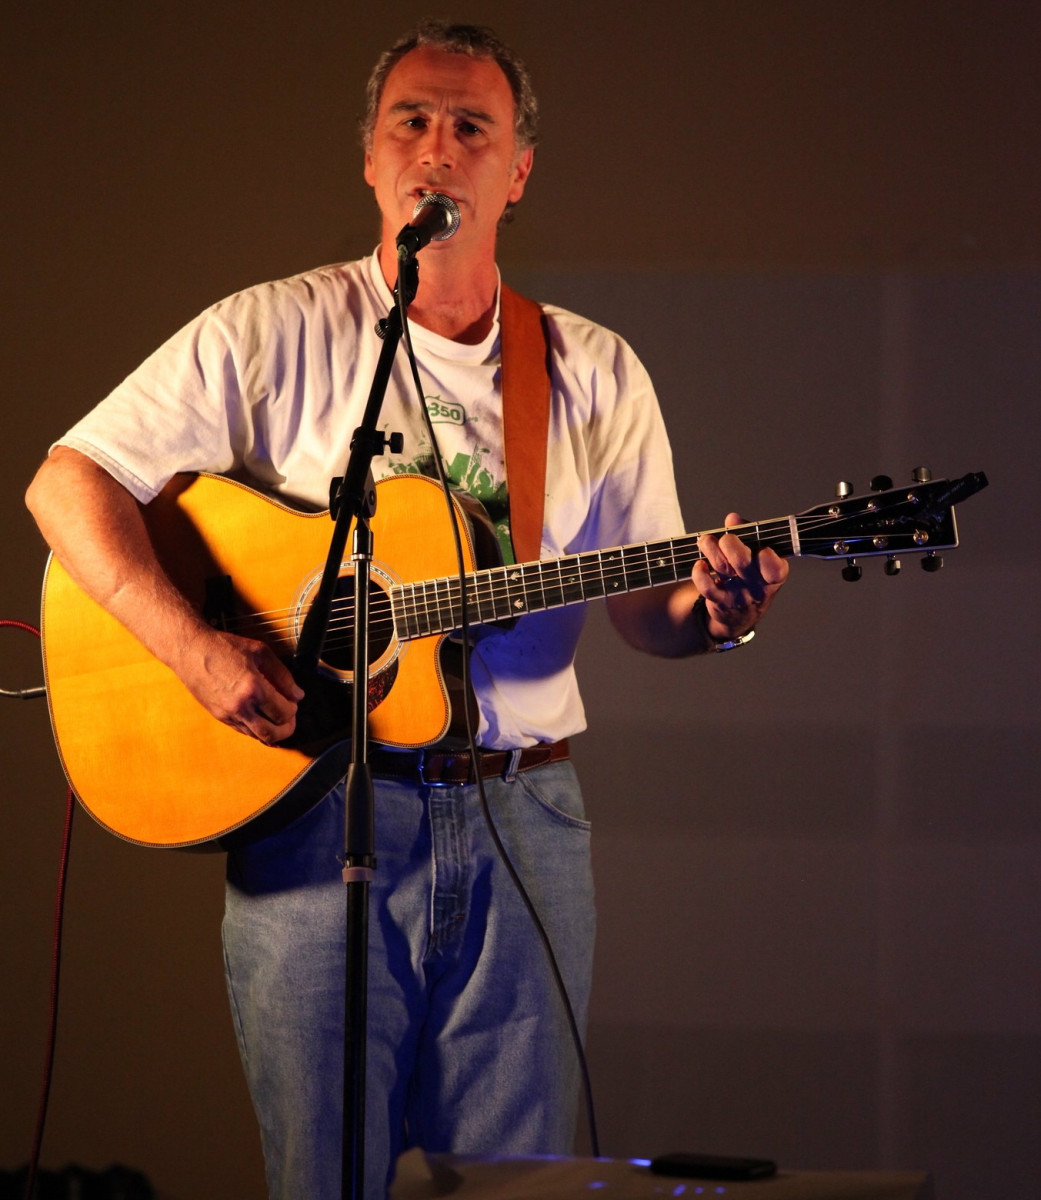 Joe Uehlein sings into a microphone while strumming an acoustic guitar.